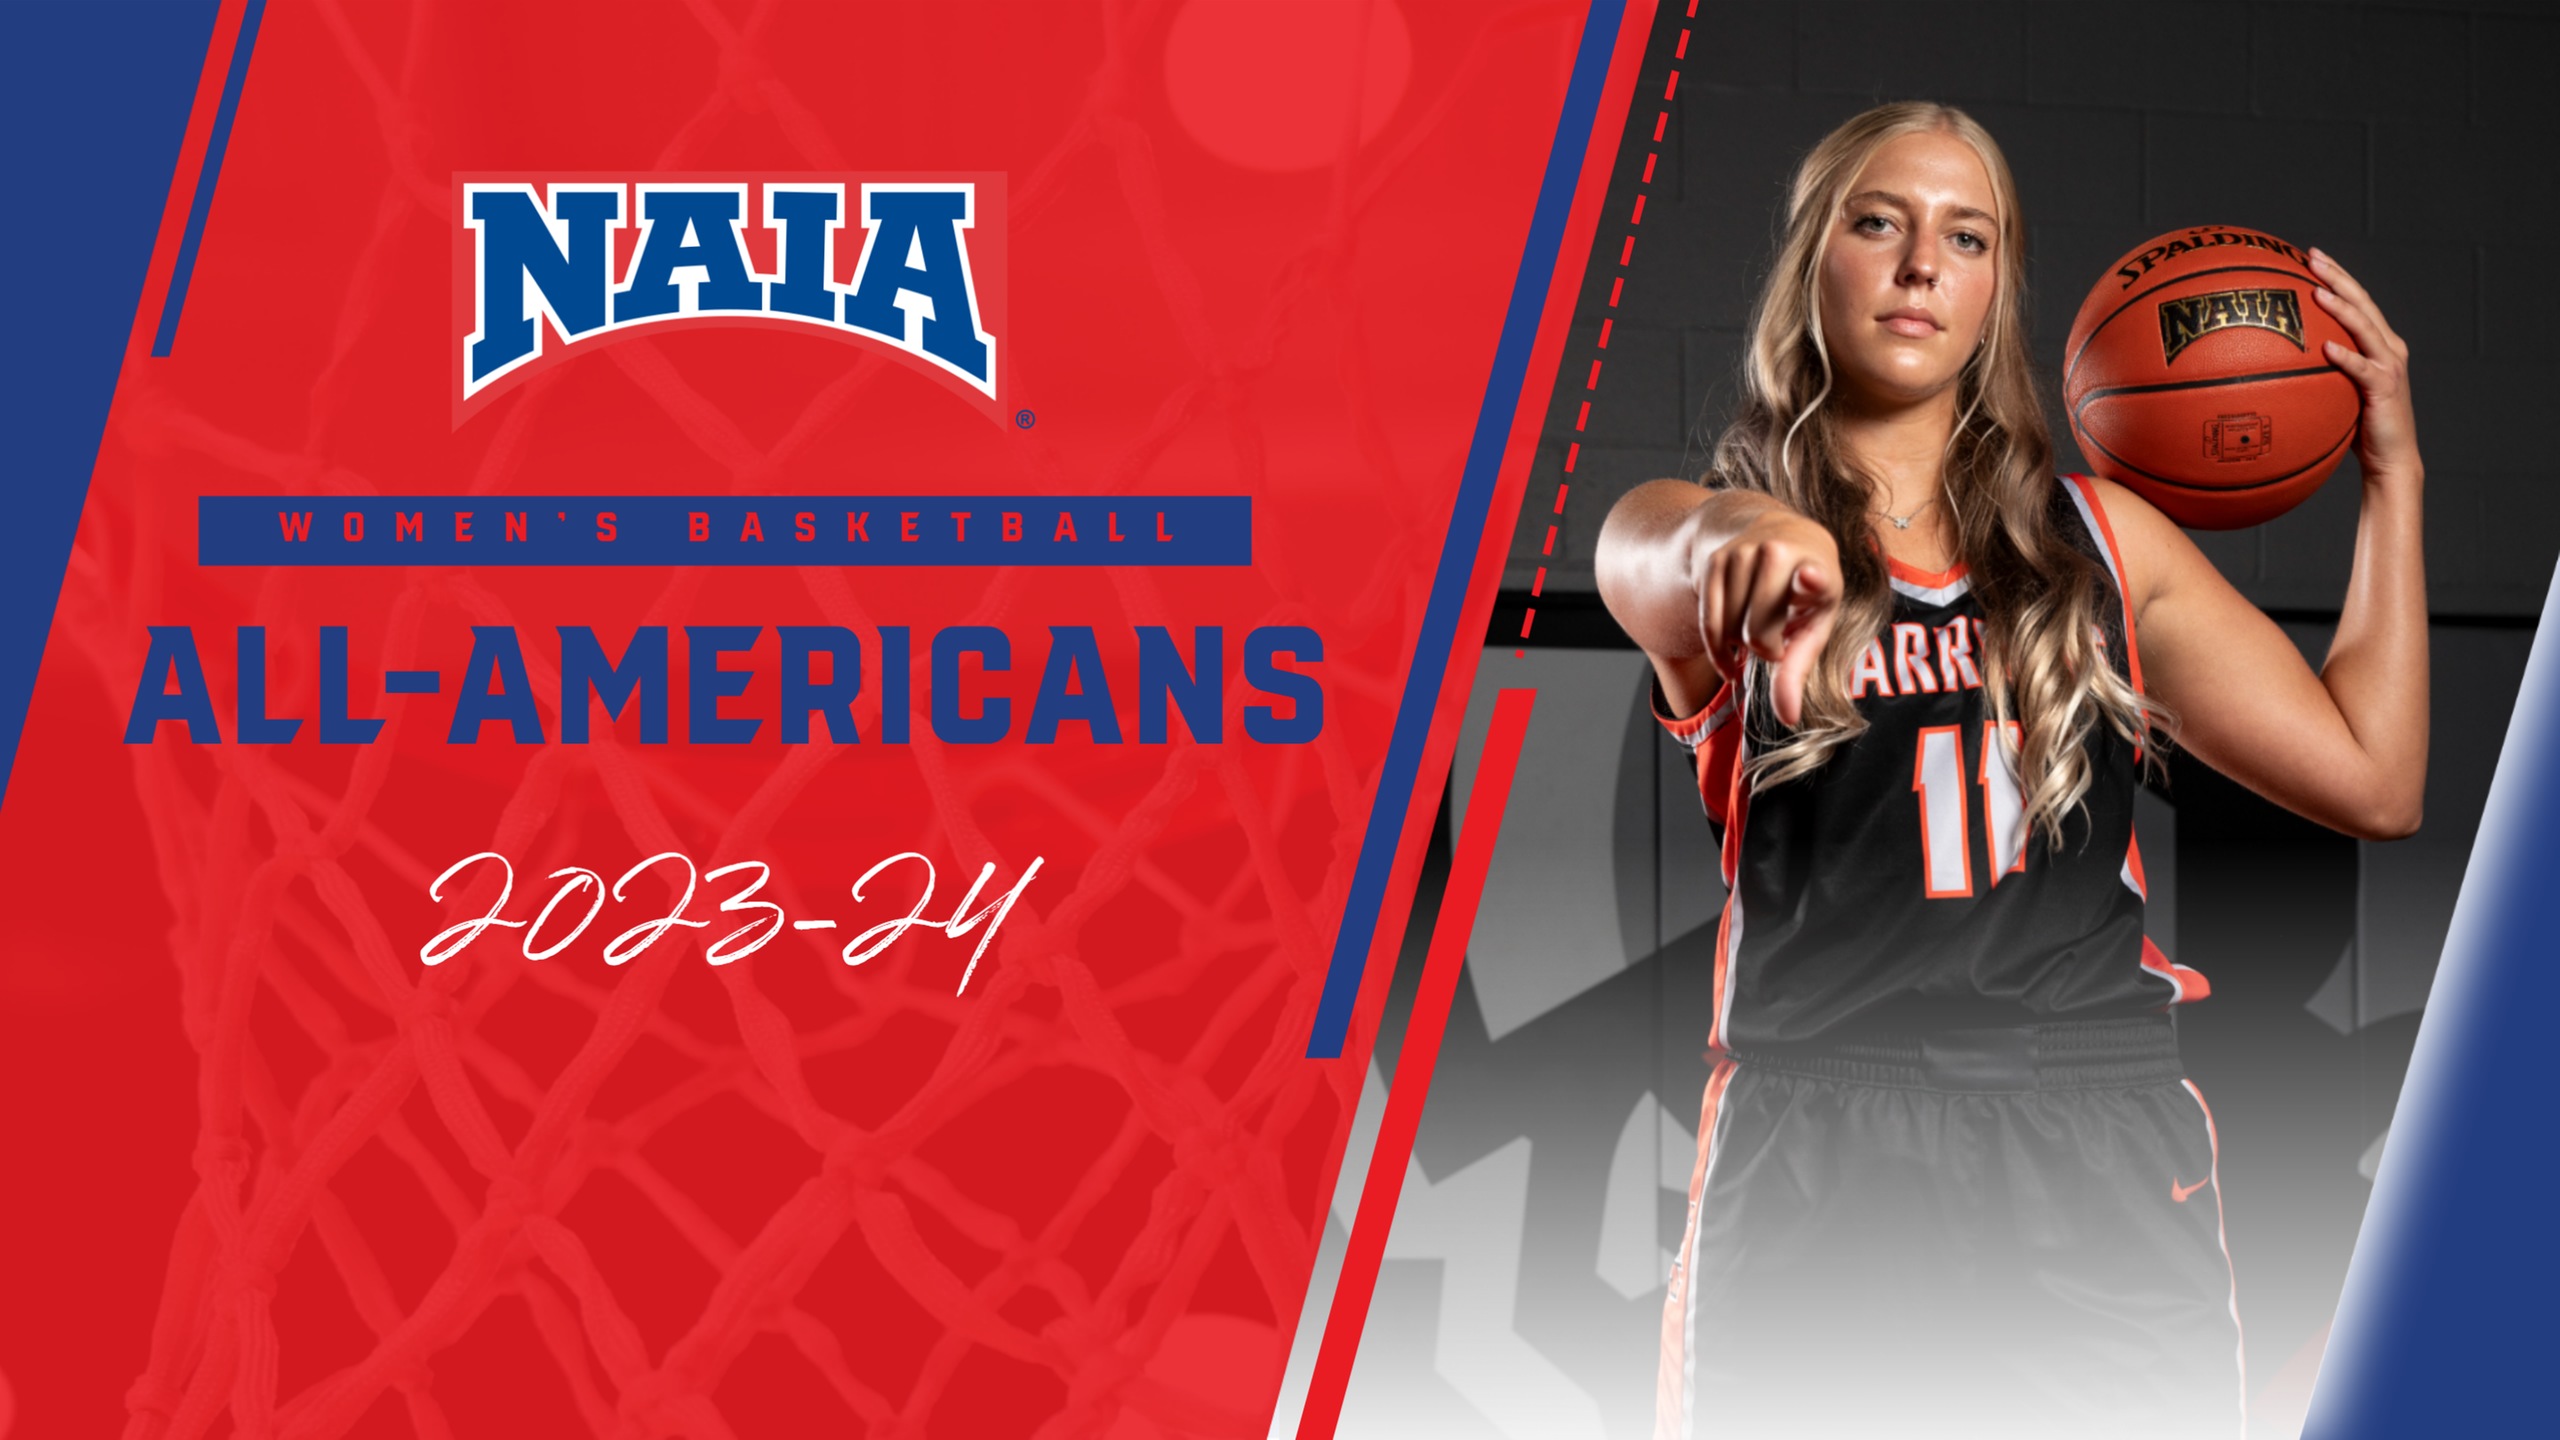 Erika Foy Named to NAIA All-American 2nd Team